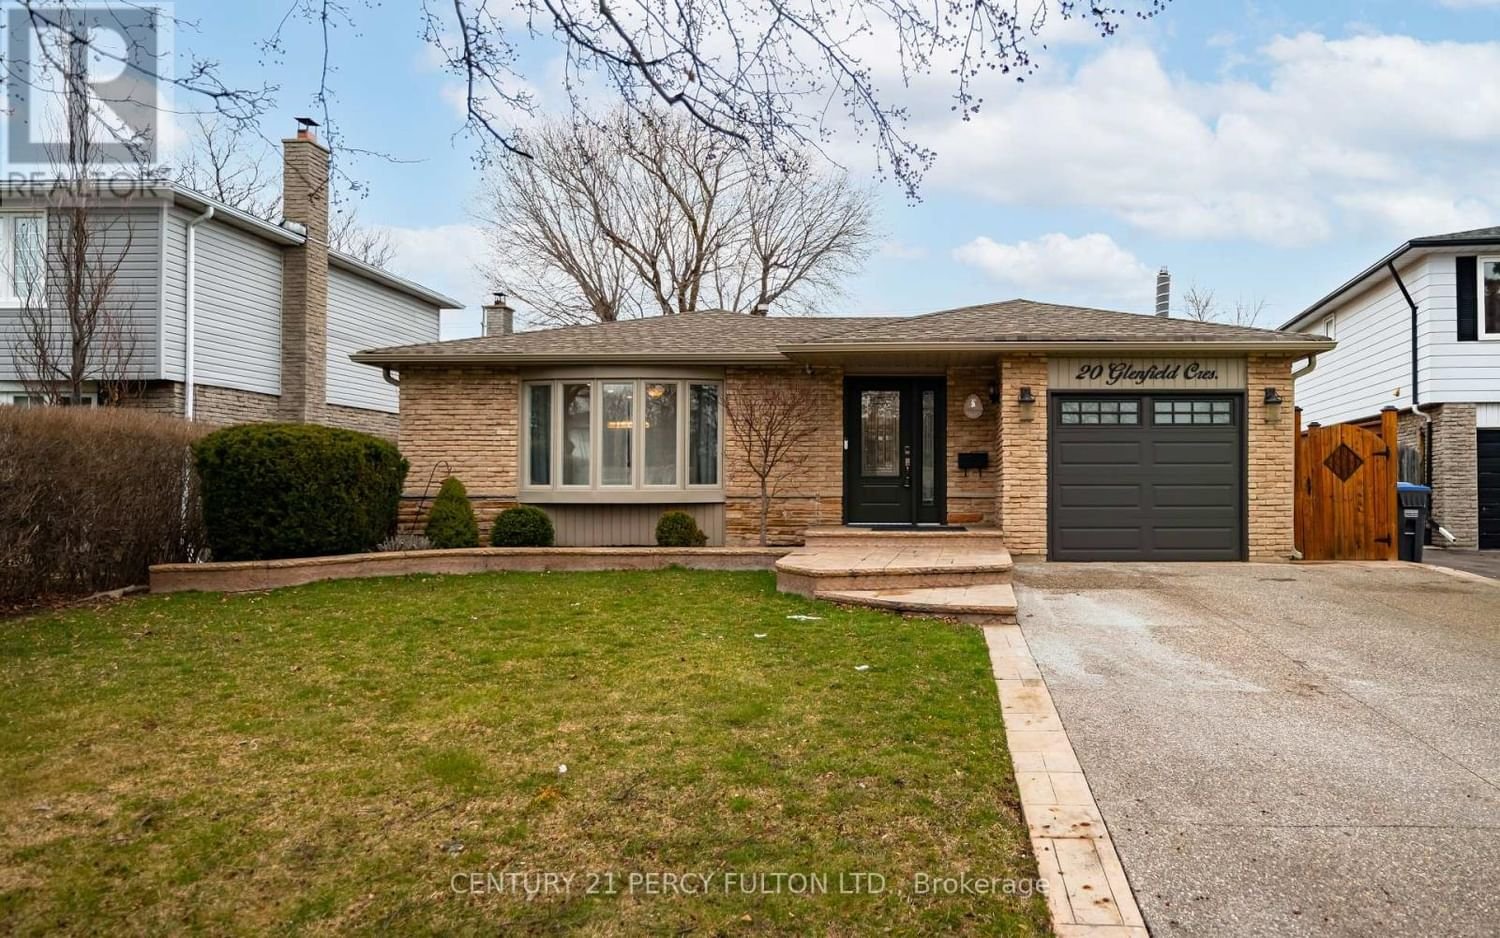 20 GLENFIELD CRES Image 1